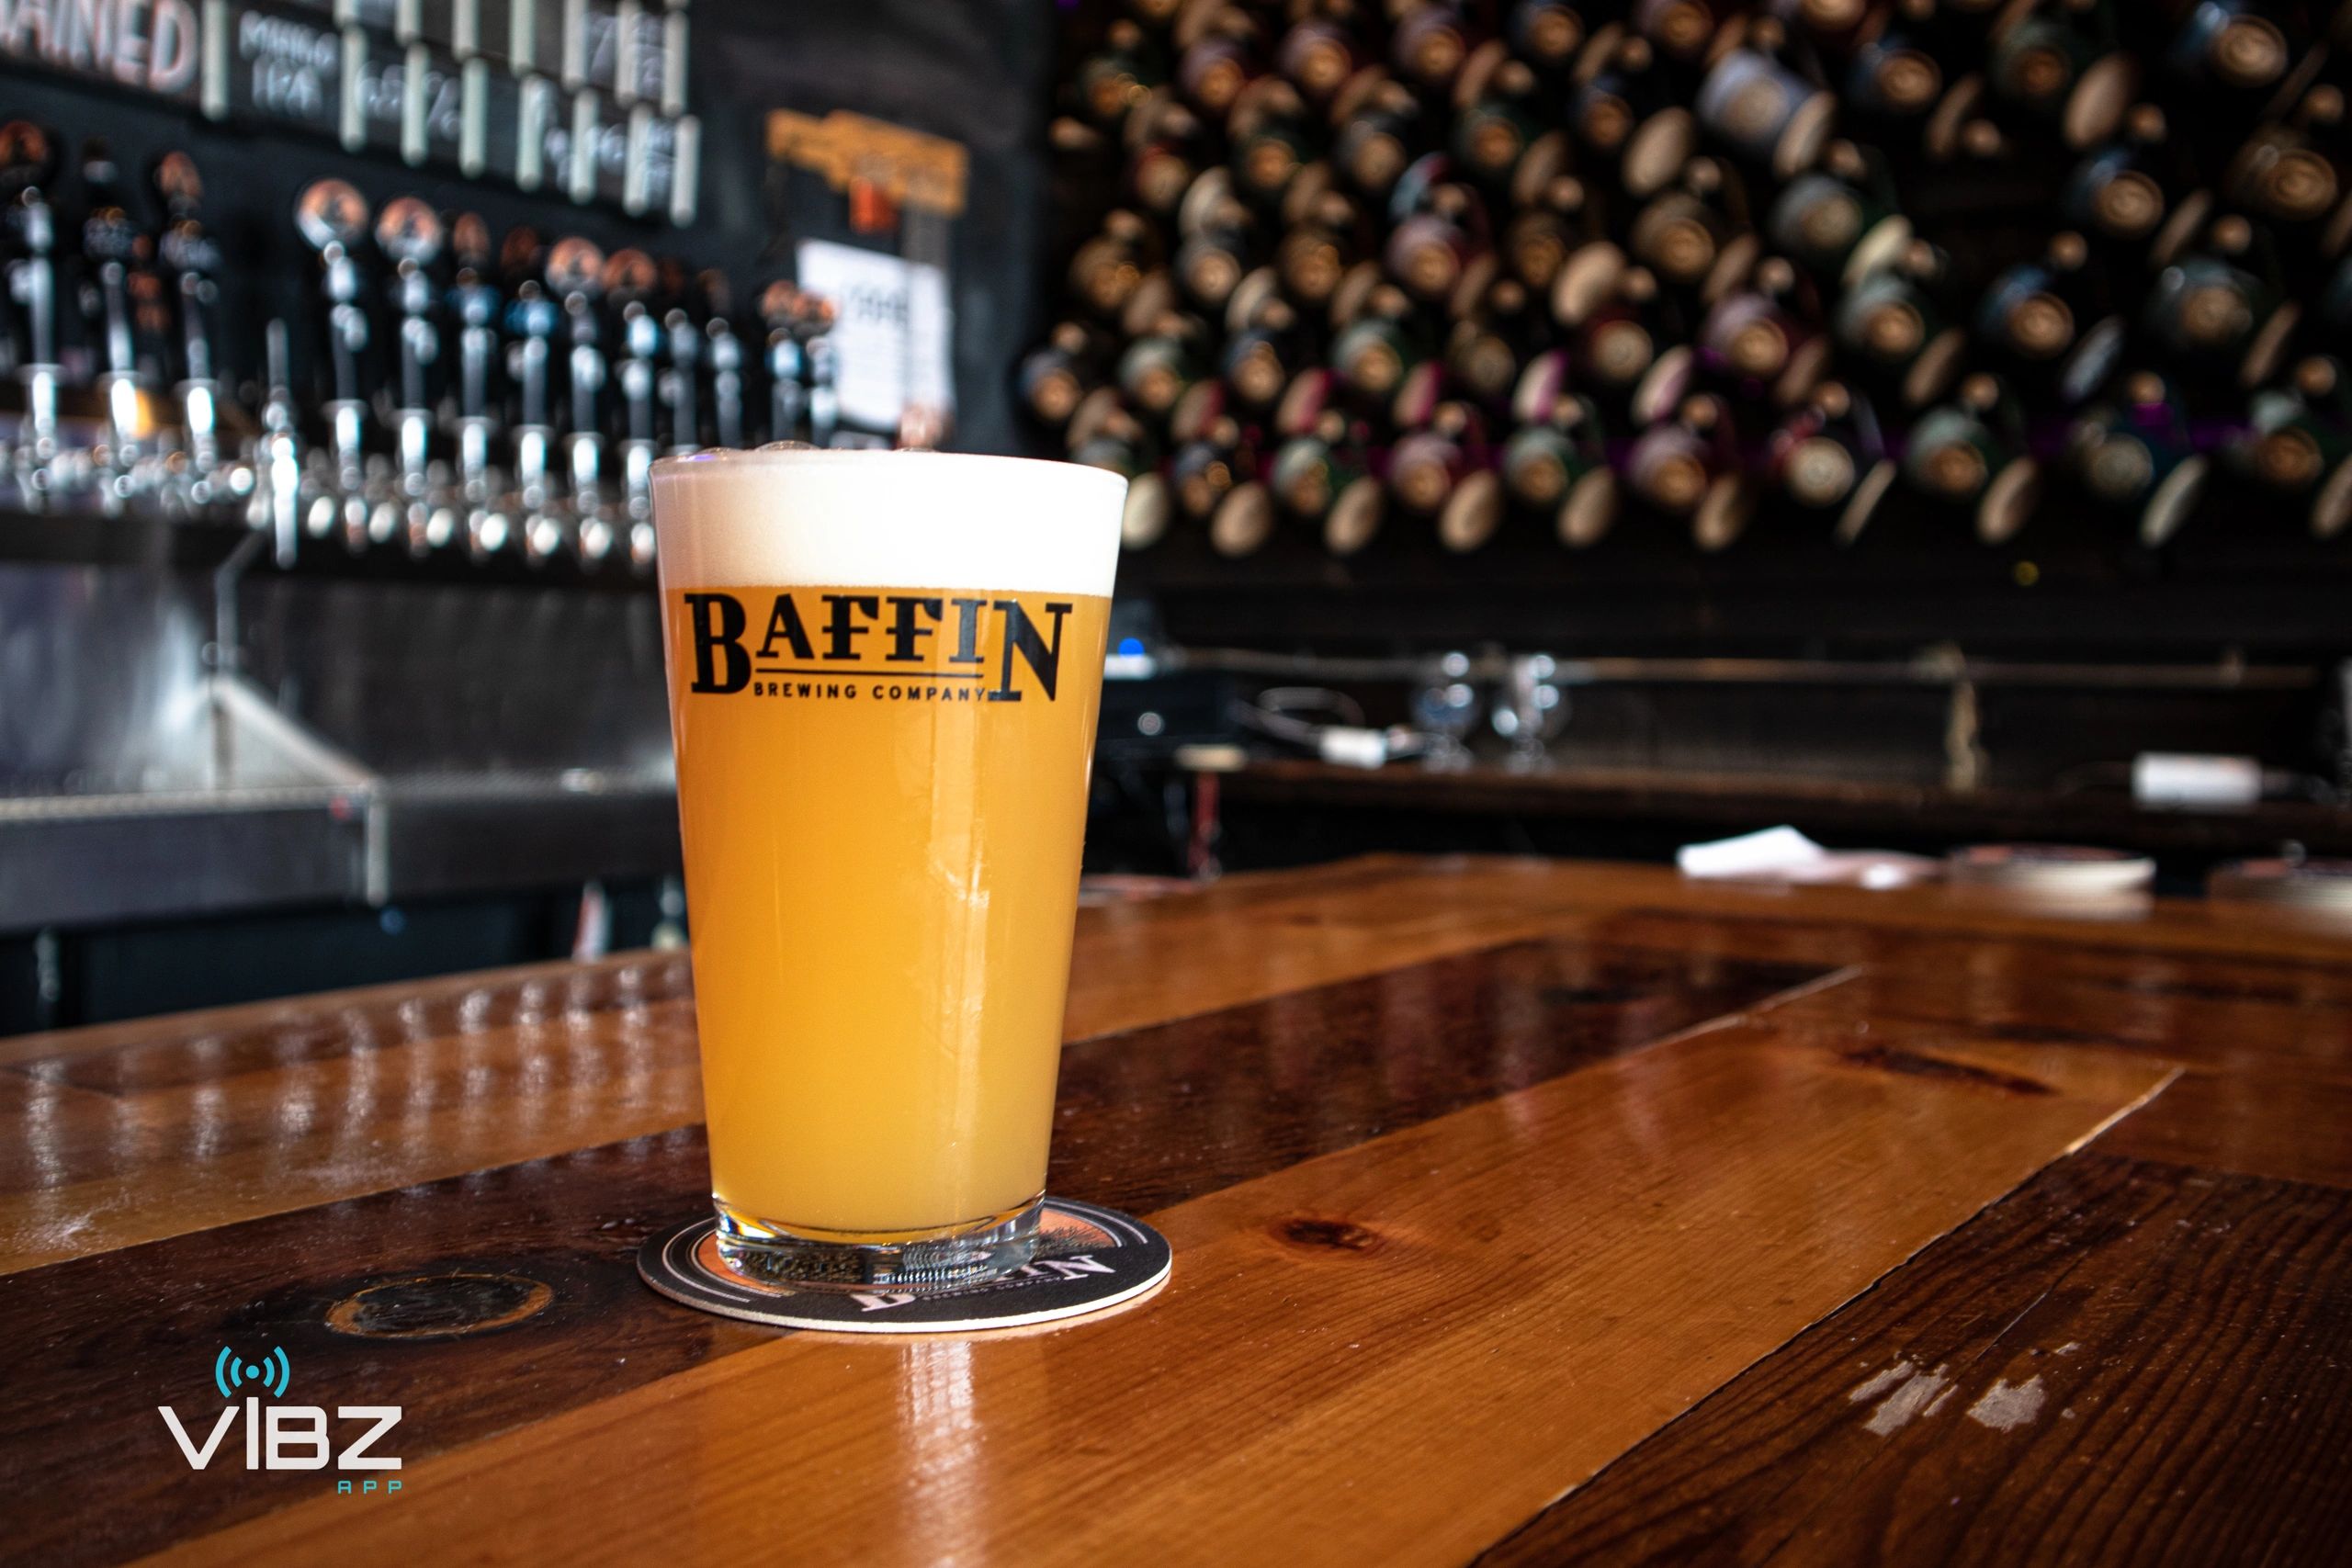 Baffin Brewing Company Bar St. Clair Shores Where to go Michigan Beers Date Ideas Inside Beer 